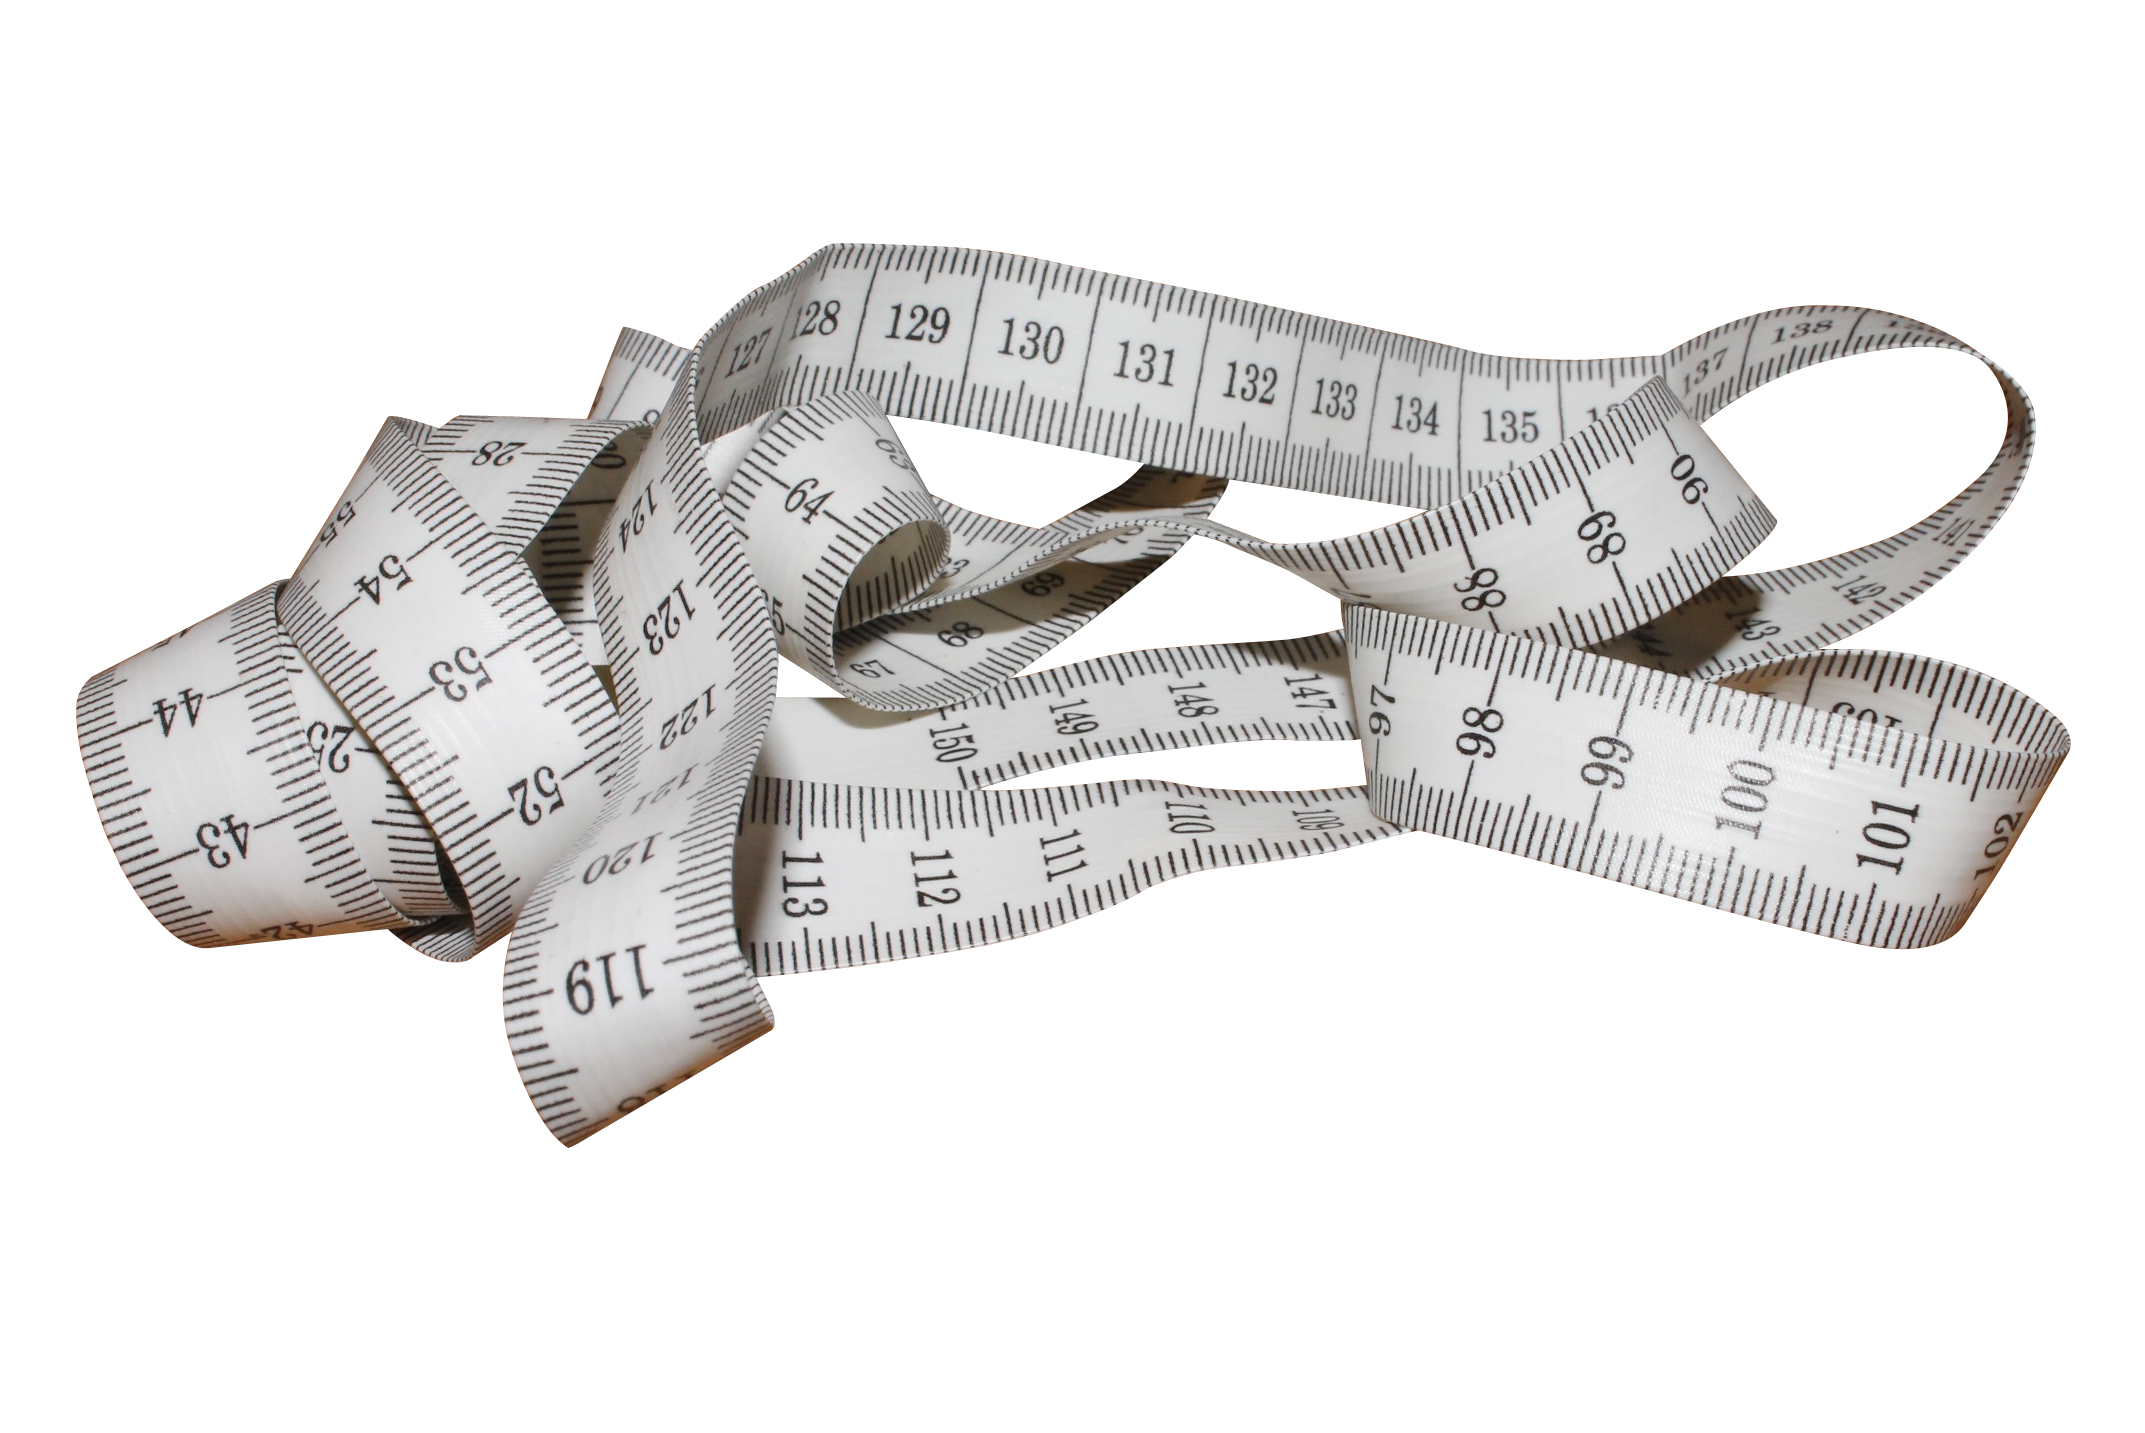 Tape Measure PNG High Quality Image